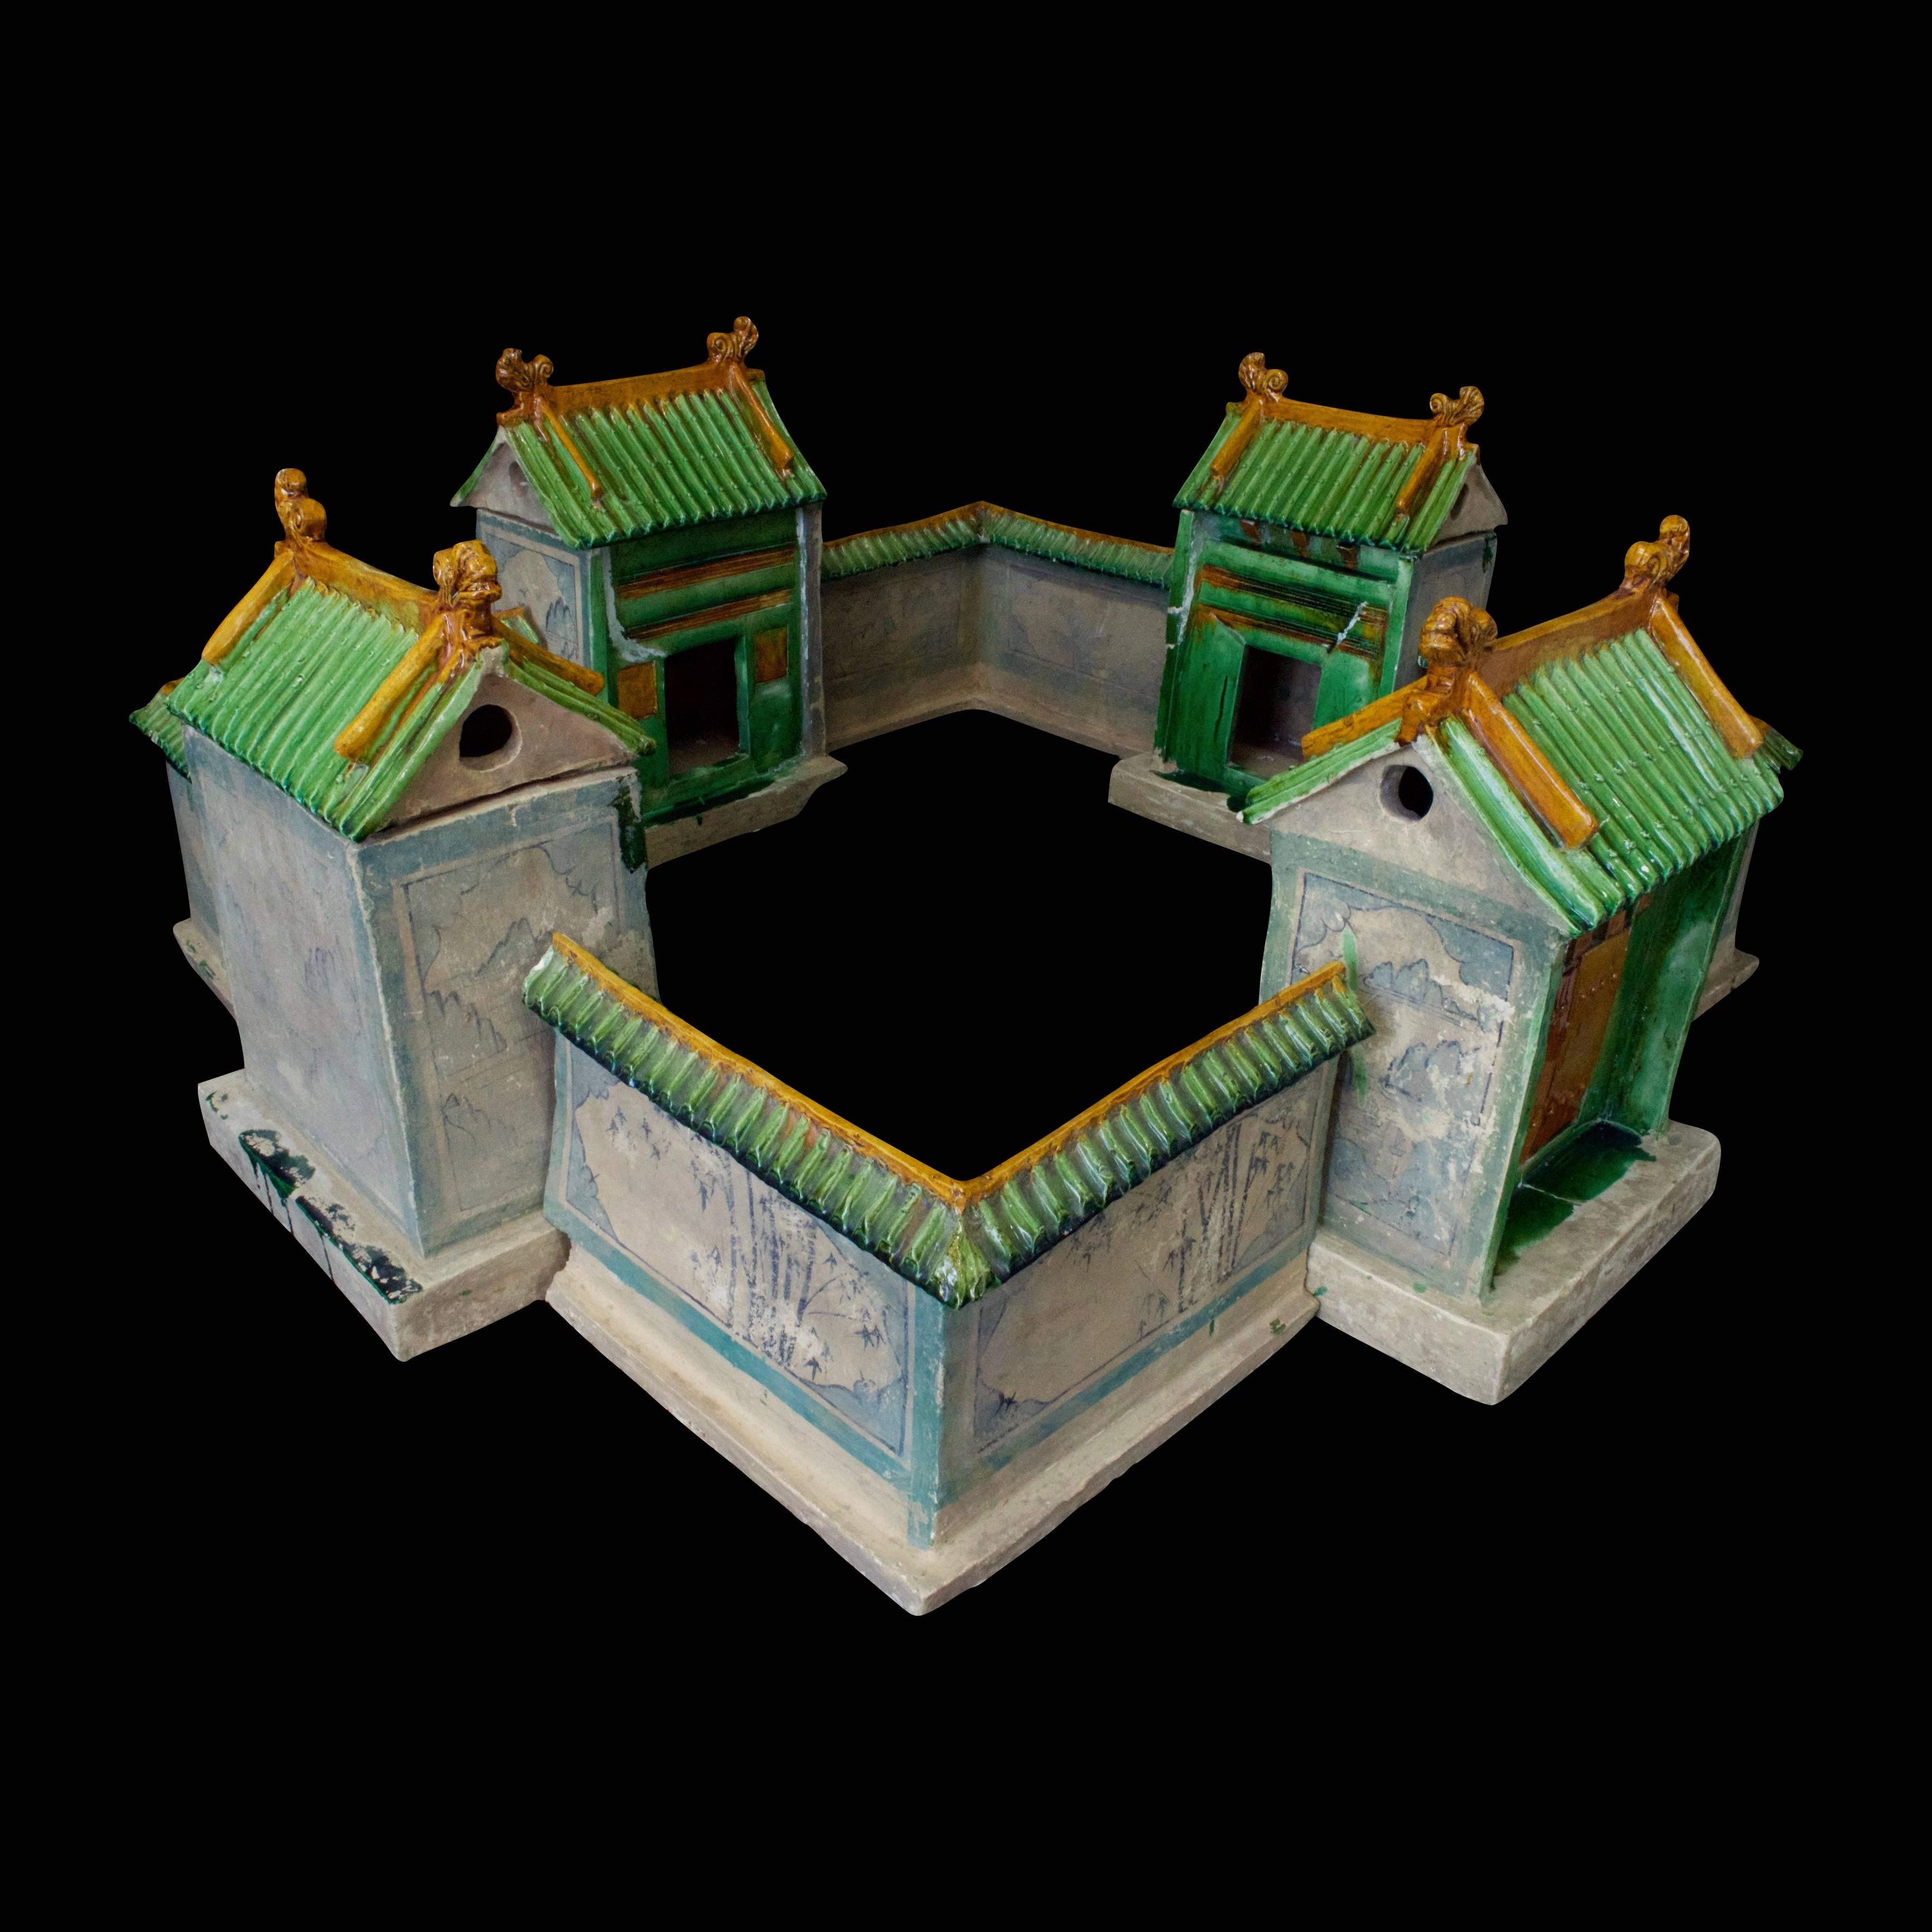 Extremely rare Chinese model of a countryside villa for the royal courtiers and ministries of the Ming Dynasty -1368-1644 AD- showing three guest houses and one main entry. The villa is surrounded by a cuadrangular wall painted with bucolic scenes